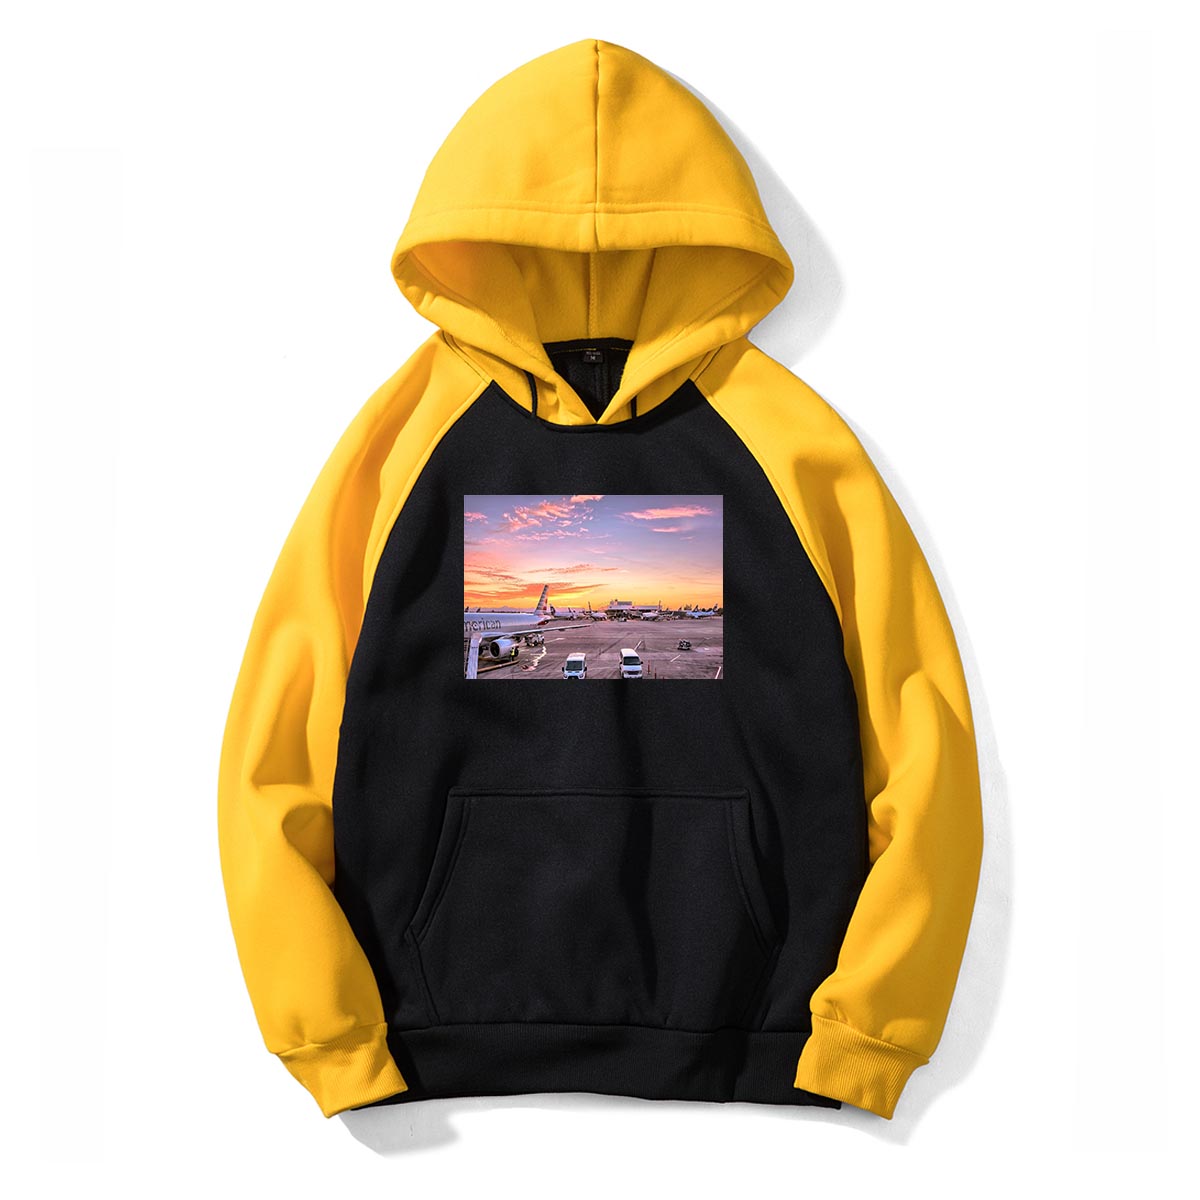 Airport Photo During Sunset Designed Colourful Hoodies